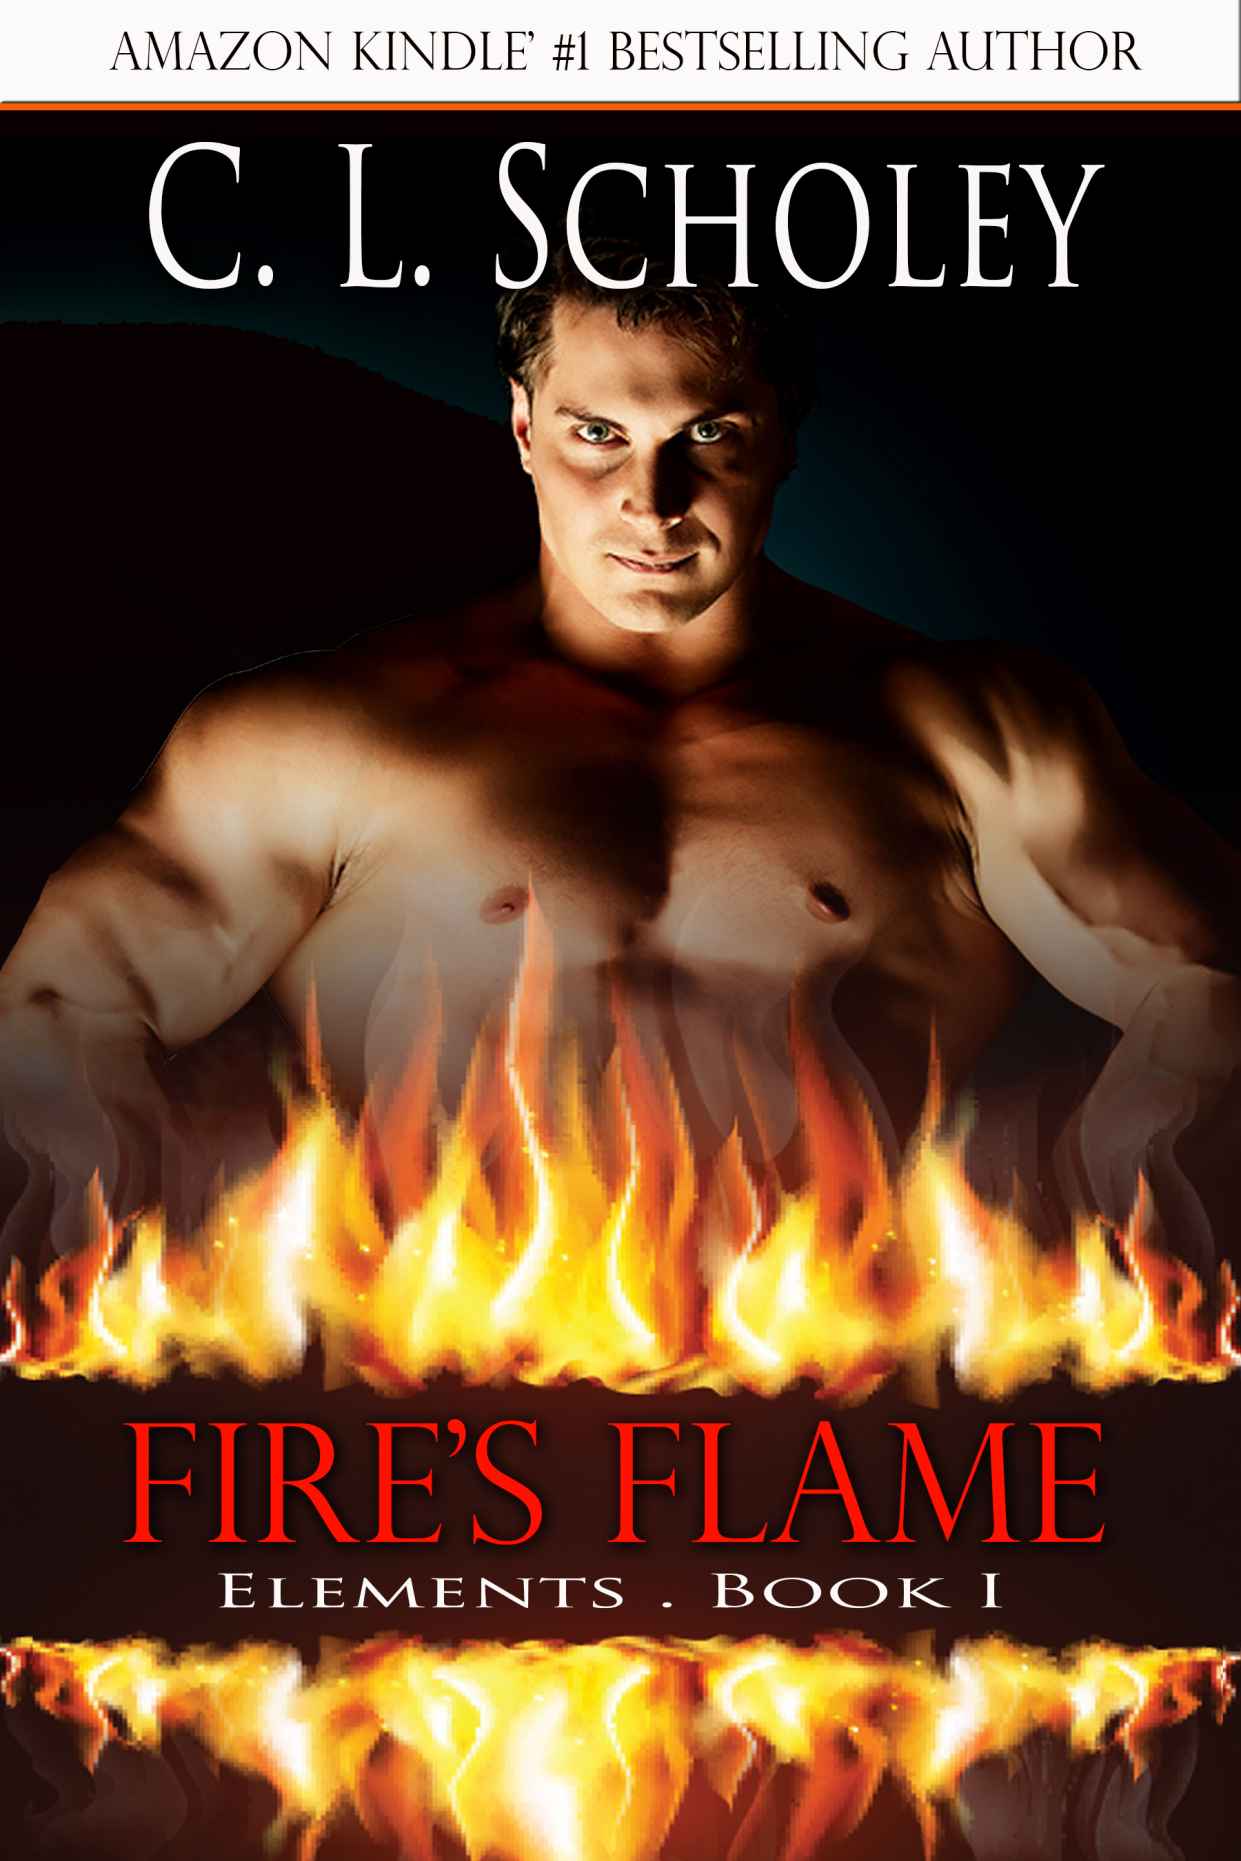 Fire's Flame [Elements Book 1] by Scholey, C. L.